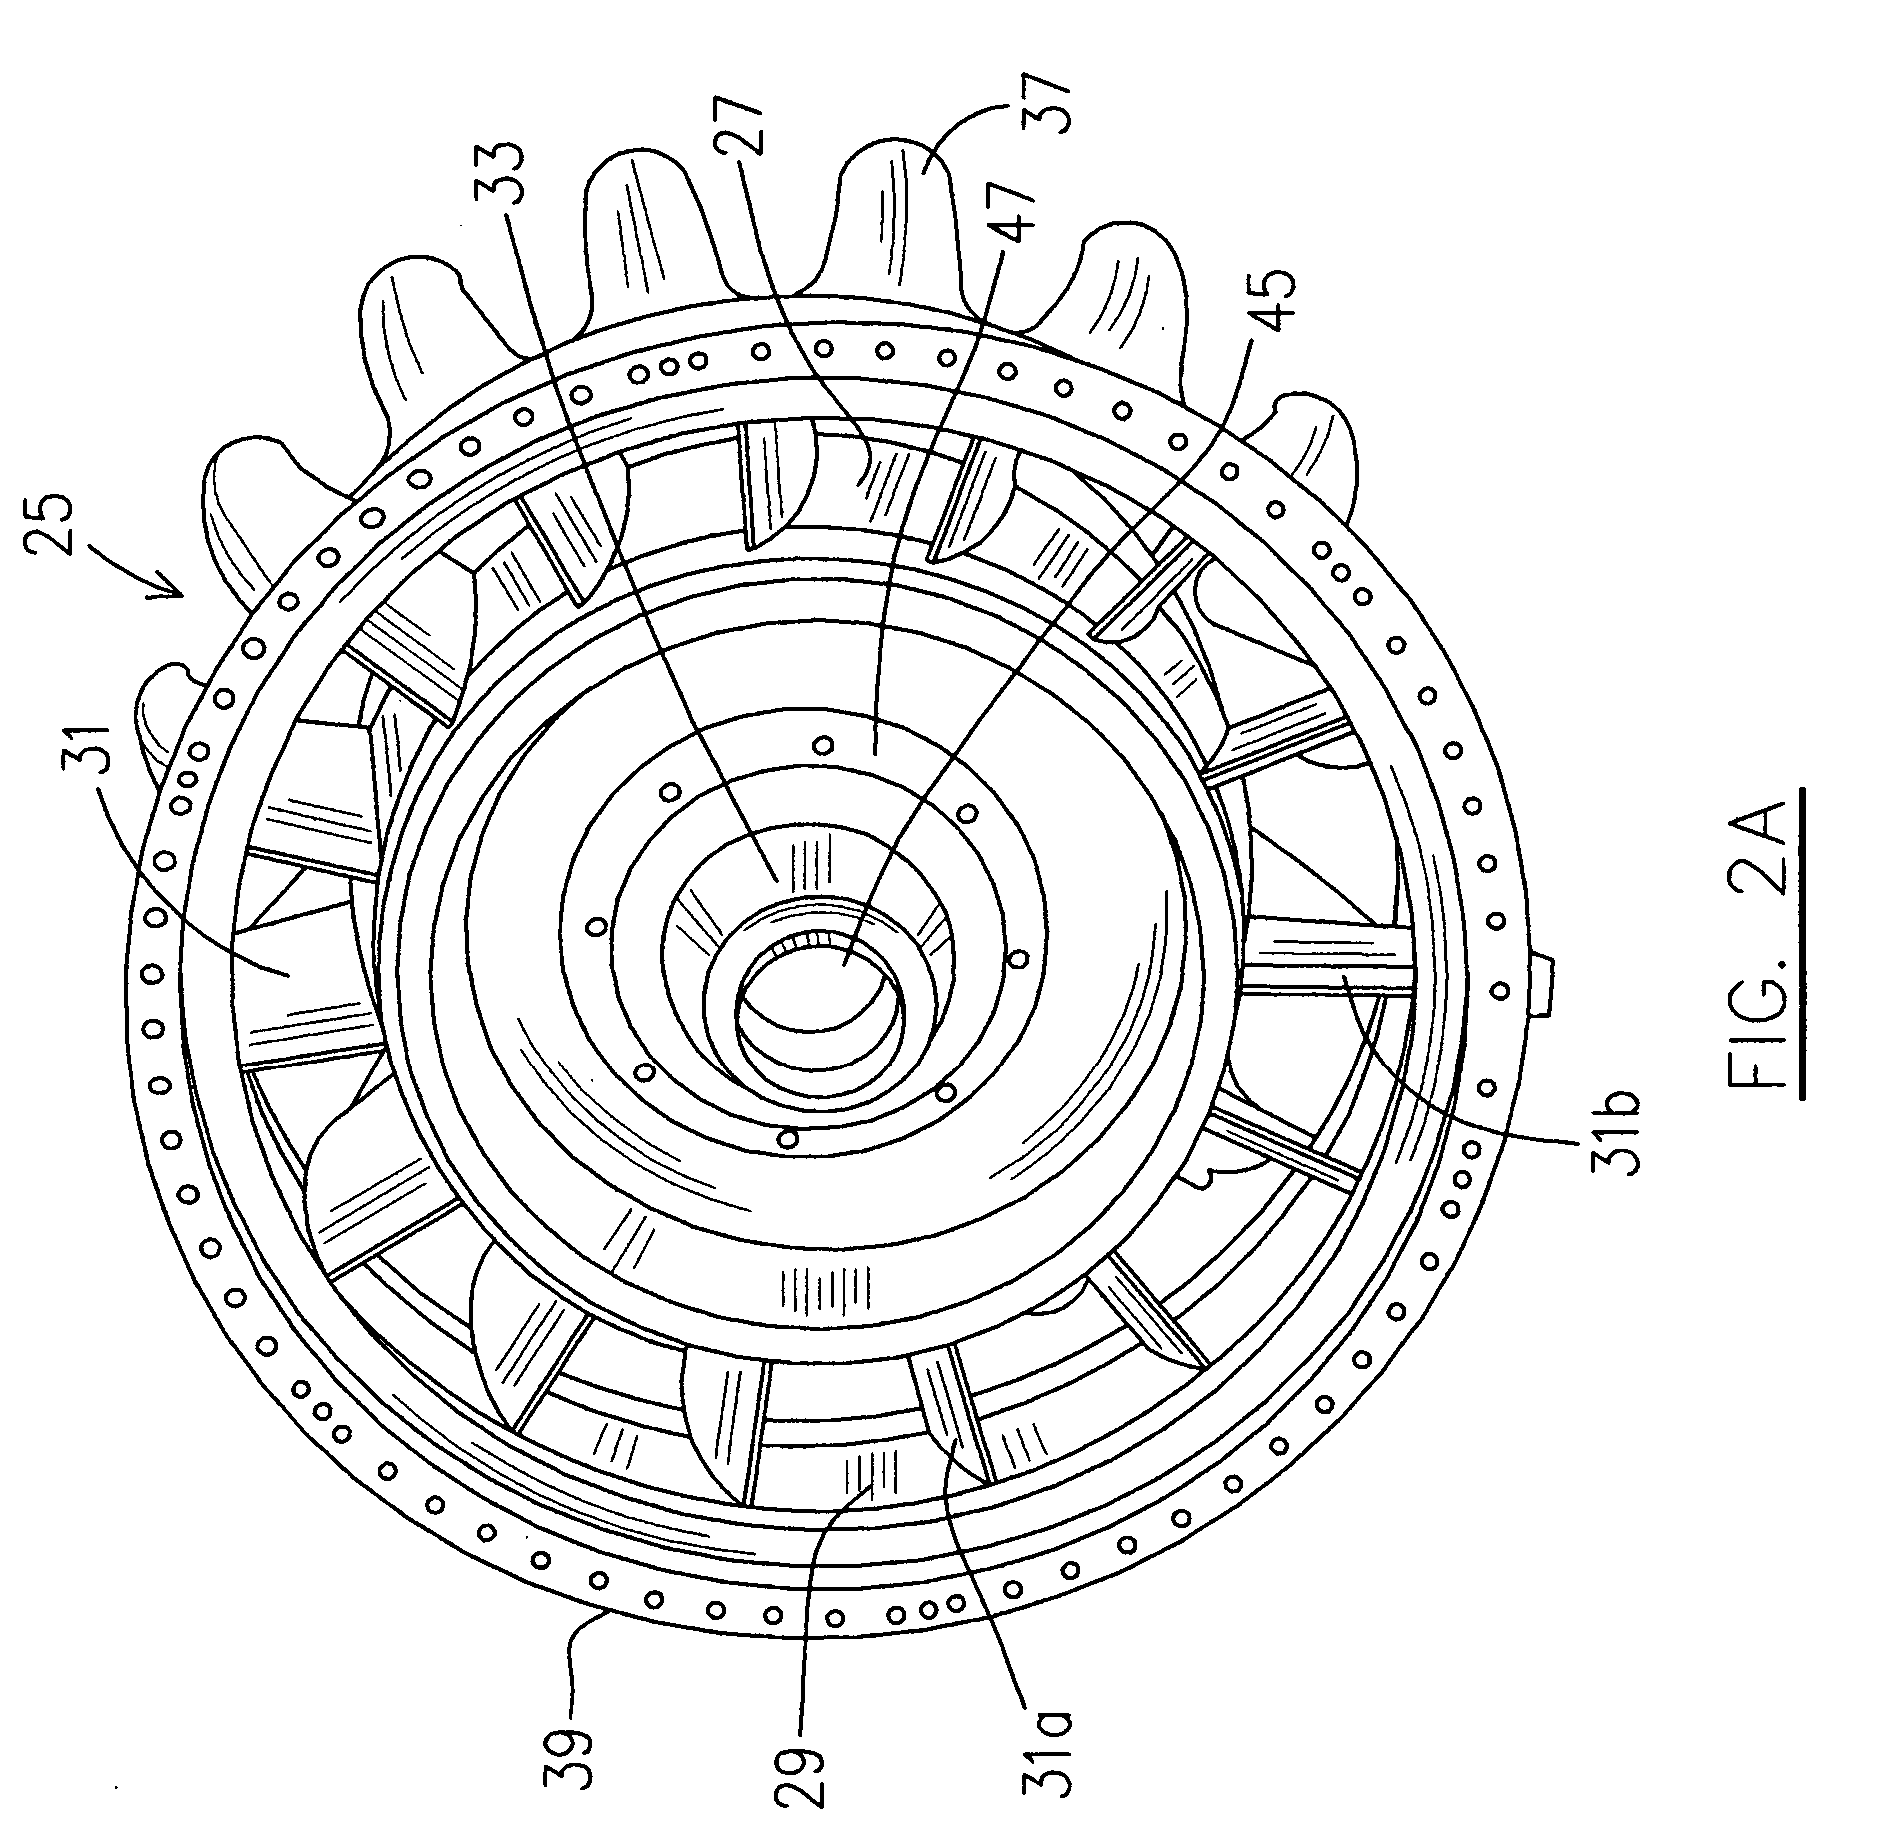 Turbine exhaust case and method of making